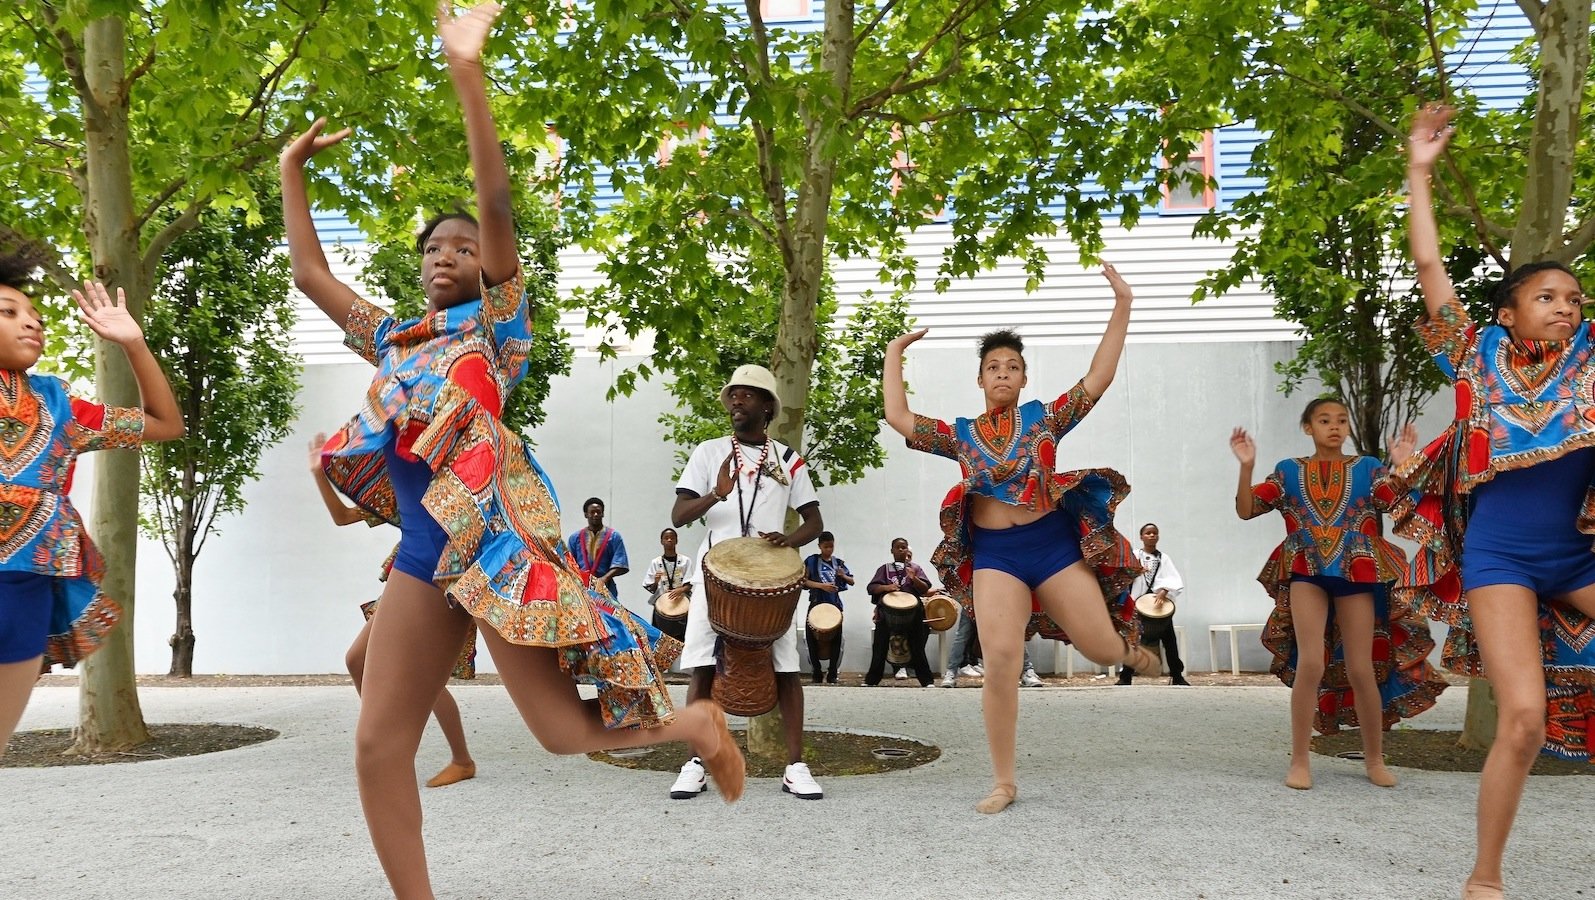 In a courtyard lined with trees, four brown-skinned teenage girls in colorful blue shorts and African-colored shirts dance with their arms in the air as a dark-skinned man in white beats on a drum in the middle of them.